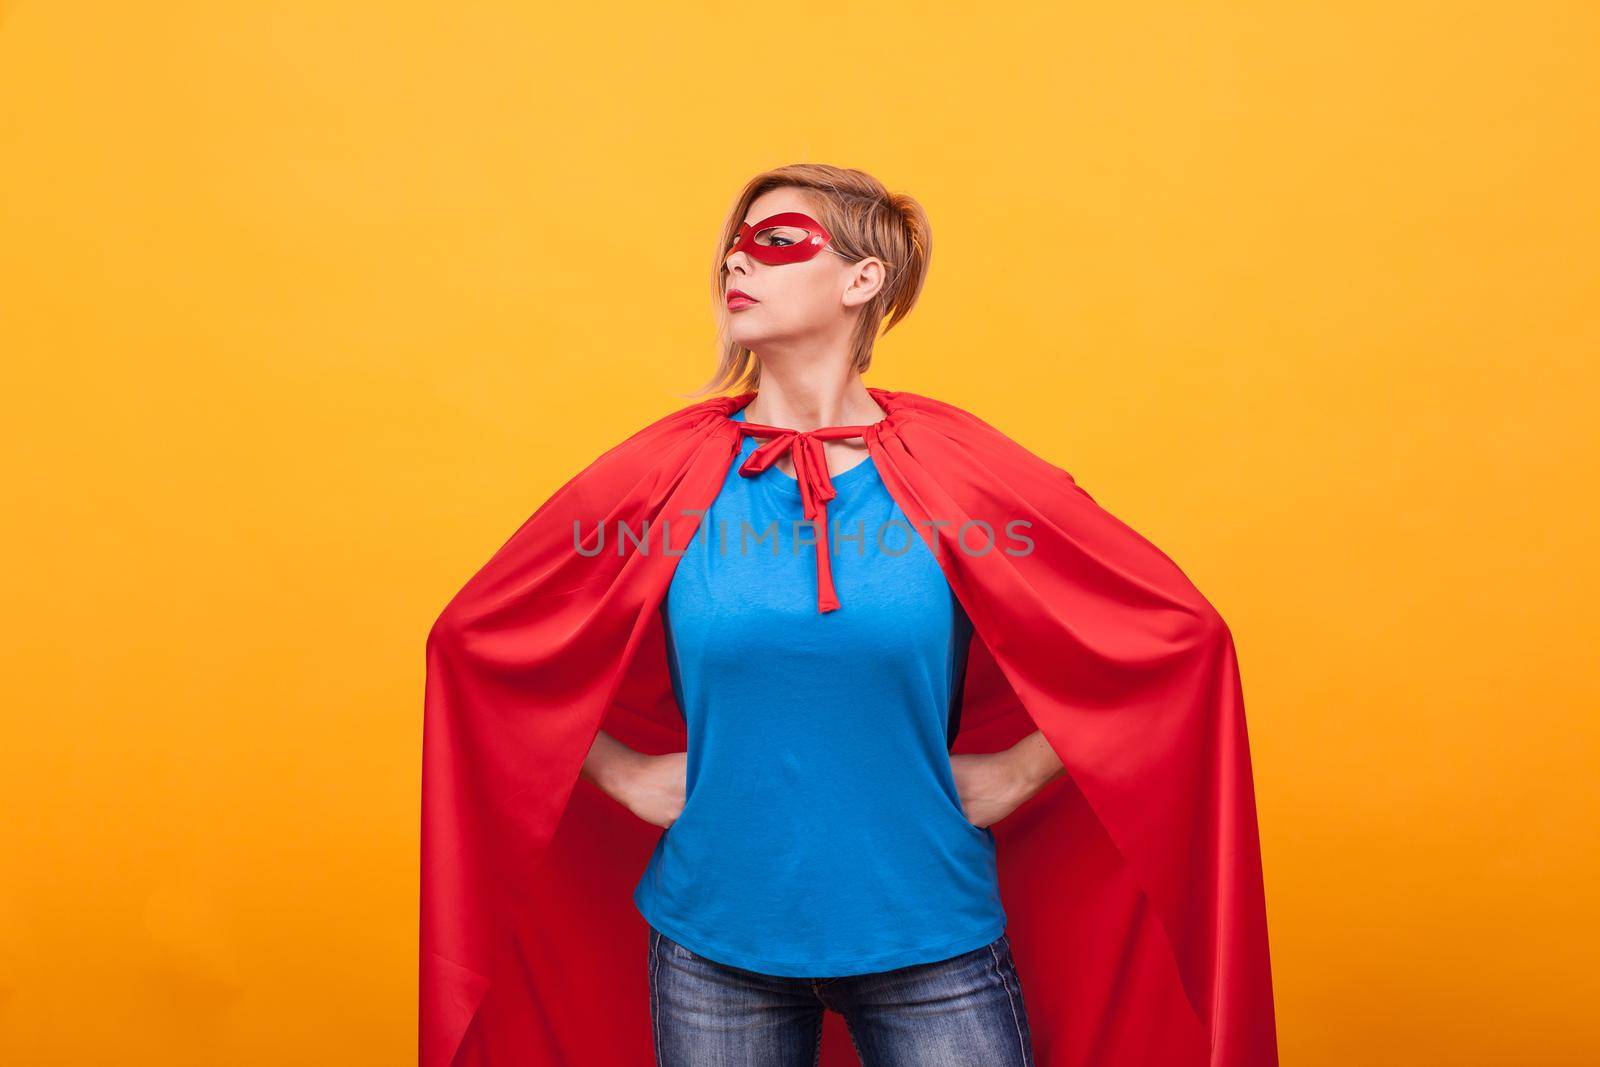 Young woman in superheros costume standing proudly over yellow background. Super powers. Red cape. red mask.